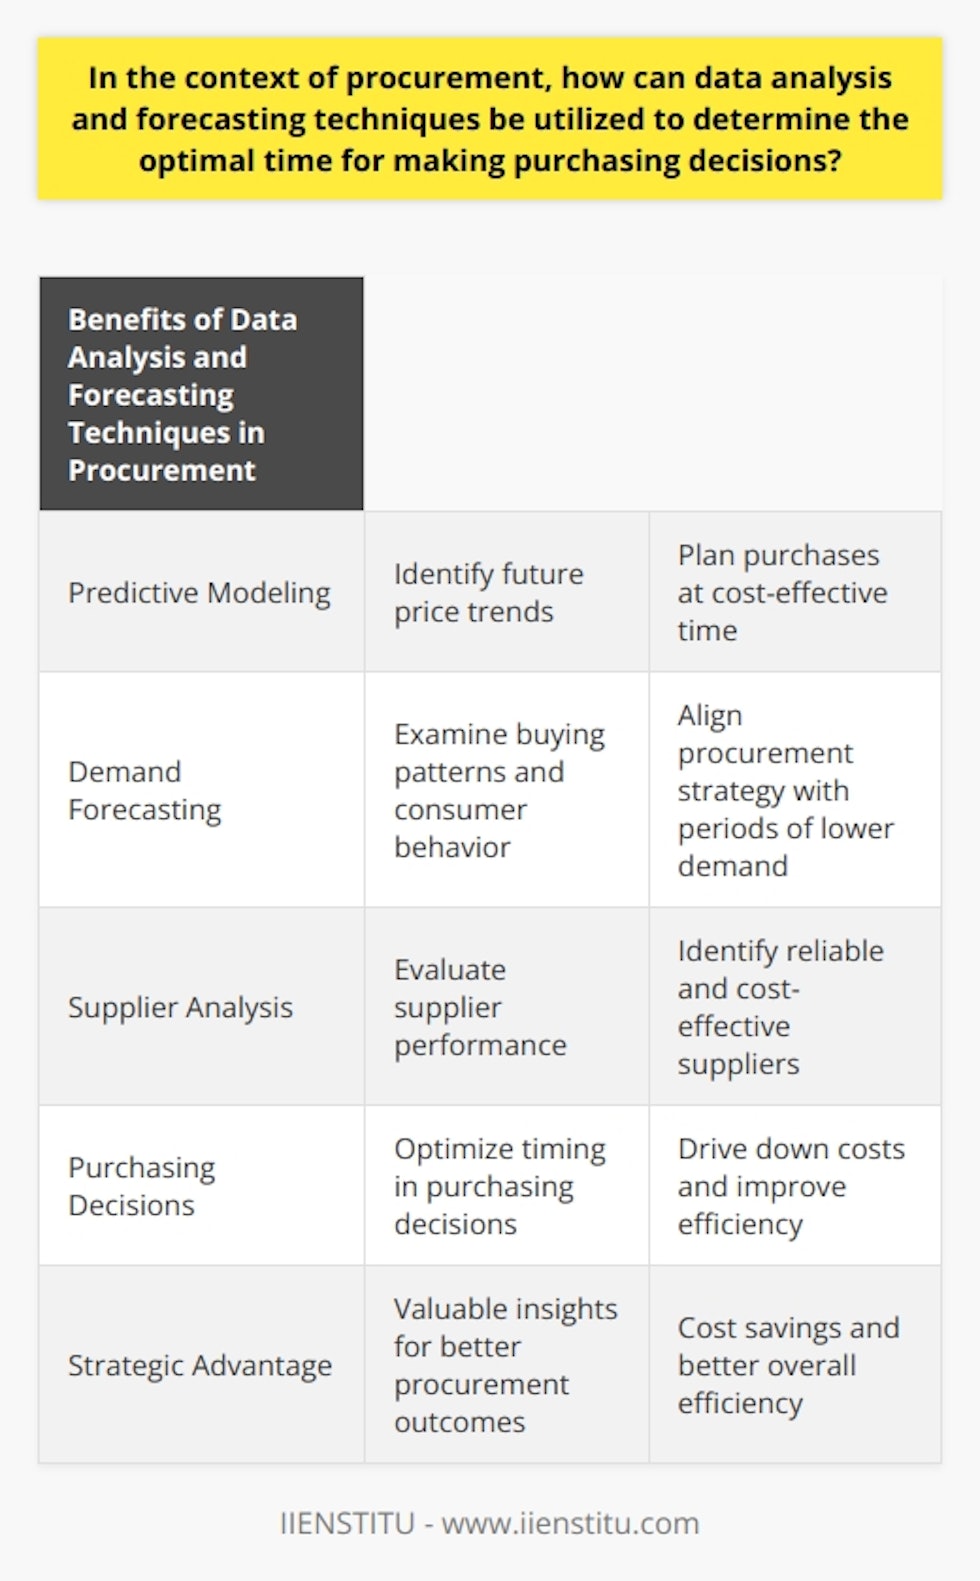 Data analysis and forecasting techniques are valuable tools in the procurement process, allowing companies to determine the optimal time for making purchasing decisions. By utilizing these methods, companies can identify trends, forecast demand, and evaluate supplier behavior, ultimately leading to cost savings and improved efficiency.One of the key ways data analysis can be used in procurement is through predictive modeling. This method uses historical data to project future price trends. By analyzing price data over time, companies can identify when costs are likely to decrease, allowing them to plan their purchases accordingly. This ensures that purchases are made at the most cost-effective time, optimizing savings.In addition to data analysis, forecasting techniques such as demand forecasting play a crucial role in determining the optimal time for purchasing. By examining past sales data, companies can identify buying patterns and consumer behavior. With the help of artificial intelligence, precise predictions of future demand can be made. Armed with this information, companies can align their procurement strategy with periods of lower demand. This not only allows them to secure products at a lower price but also helps to minimize inventory carrying costs.Furthermore, data analysis can also provide insights into supplier behavior. By evaluating supplier performance over time, companies can identify the most reliable and cost-effective suppliers. Armed with this knowledge, companies can plan their purchases to coincide with times when these top-performing suppliers offer discounts or promotions. This helps to drive down costs further and improve overall efficiency in procurement.In conclusion, utilizing data analysis and forecasting techniques in procurement can provide companies with valuable insights and strategic advantages. By analyzing price trends, forecasting demand, and evaluating supplier behavior, companies can determine the optimal time to make purchasing decisions. This, in turn, leads to cost savings, improved efficiency, and better overall procurement outcomes. Investing in the right data analysis and forecasting tools is, therefore, crucial for companies looking to optimize timing in their purchasing decisions.